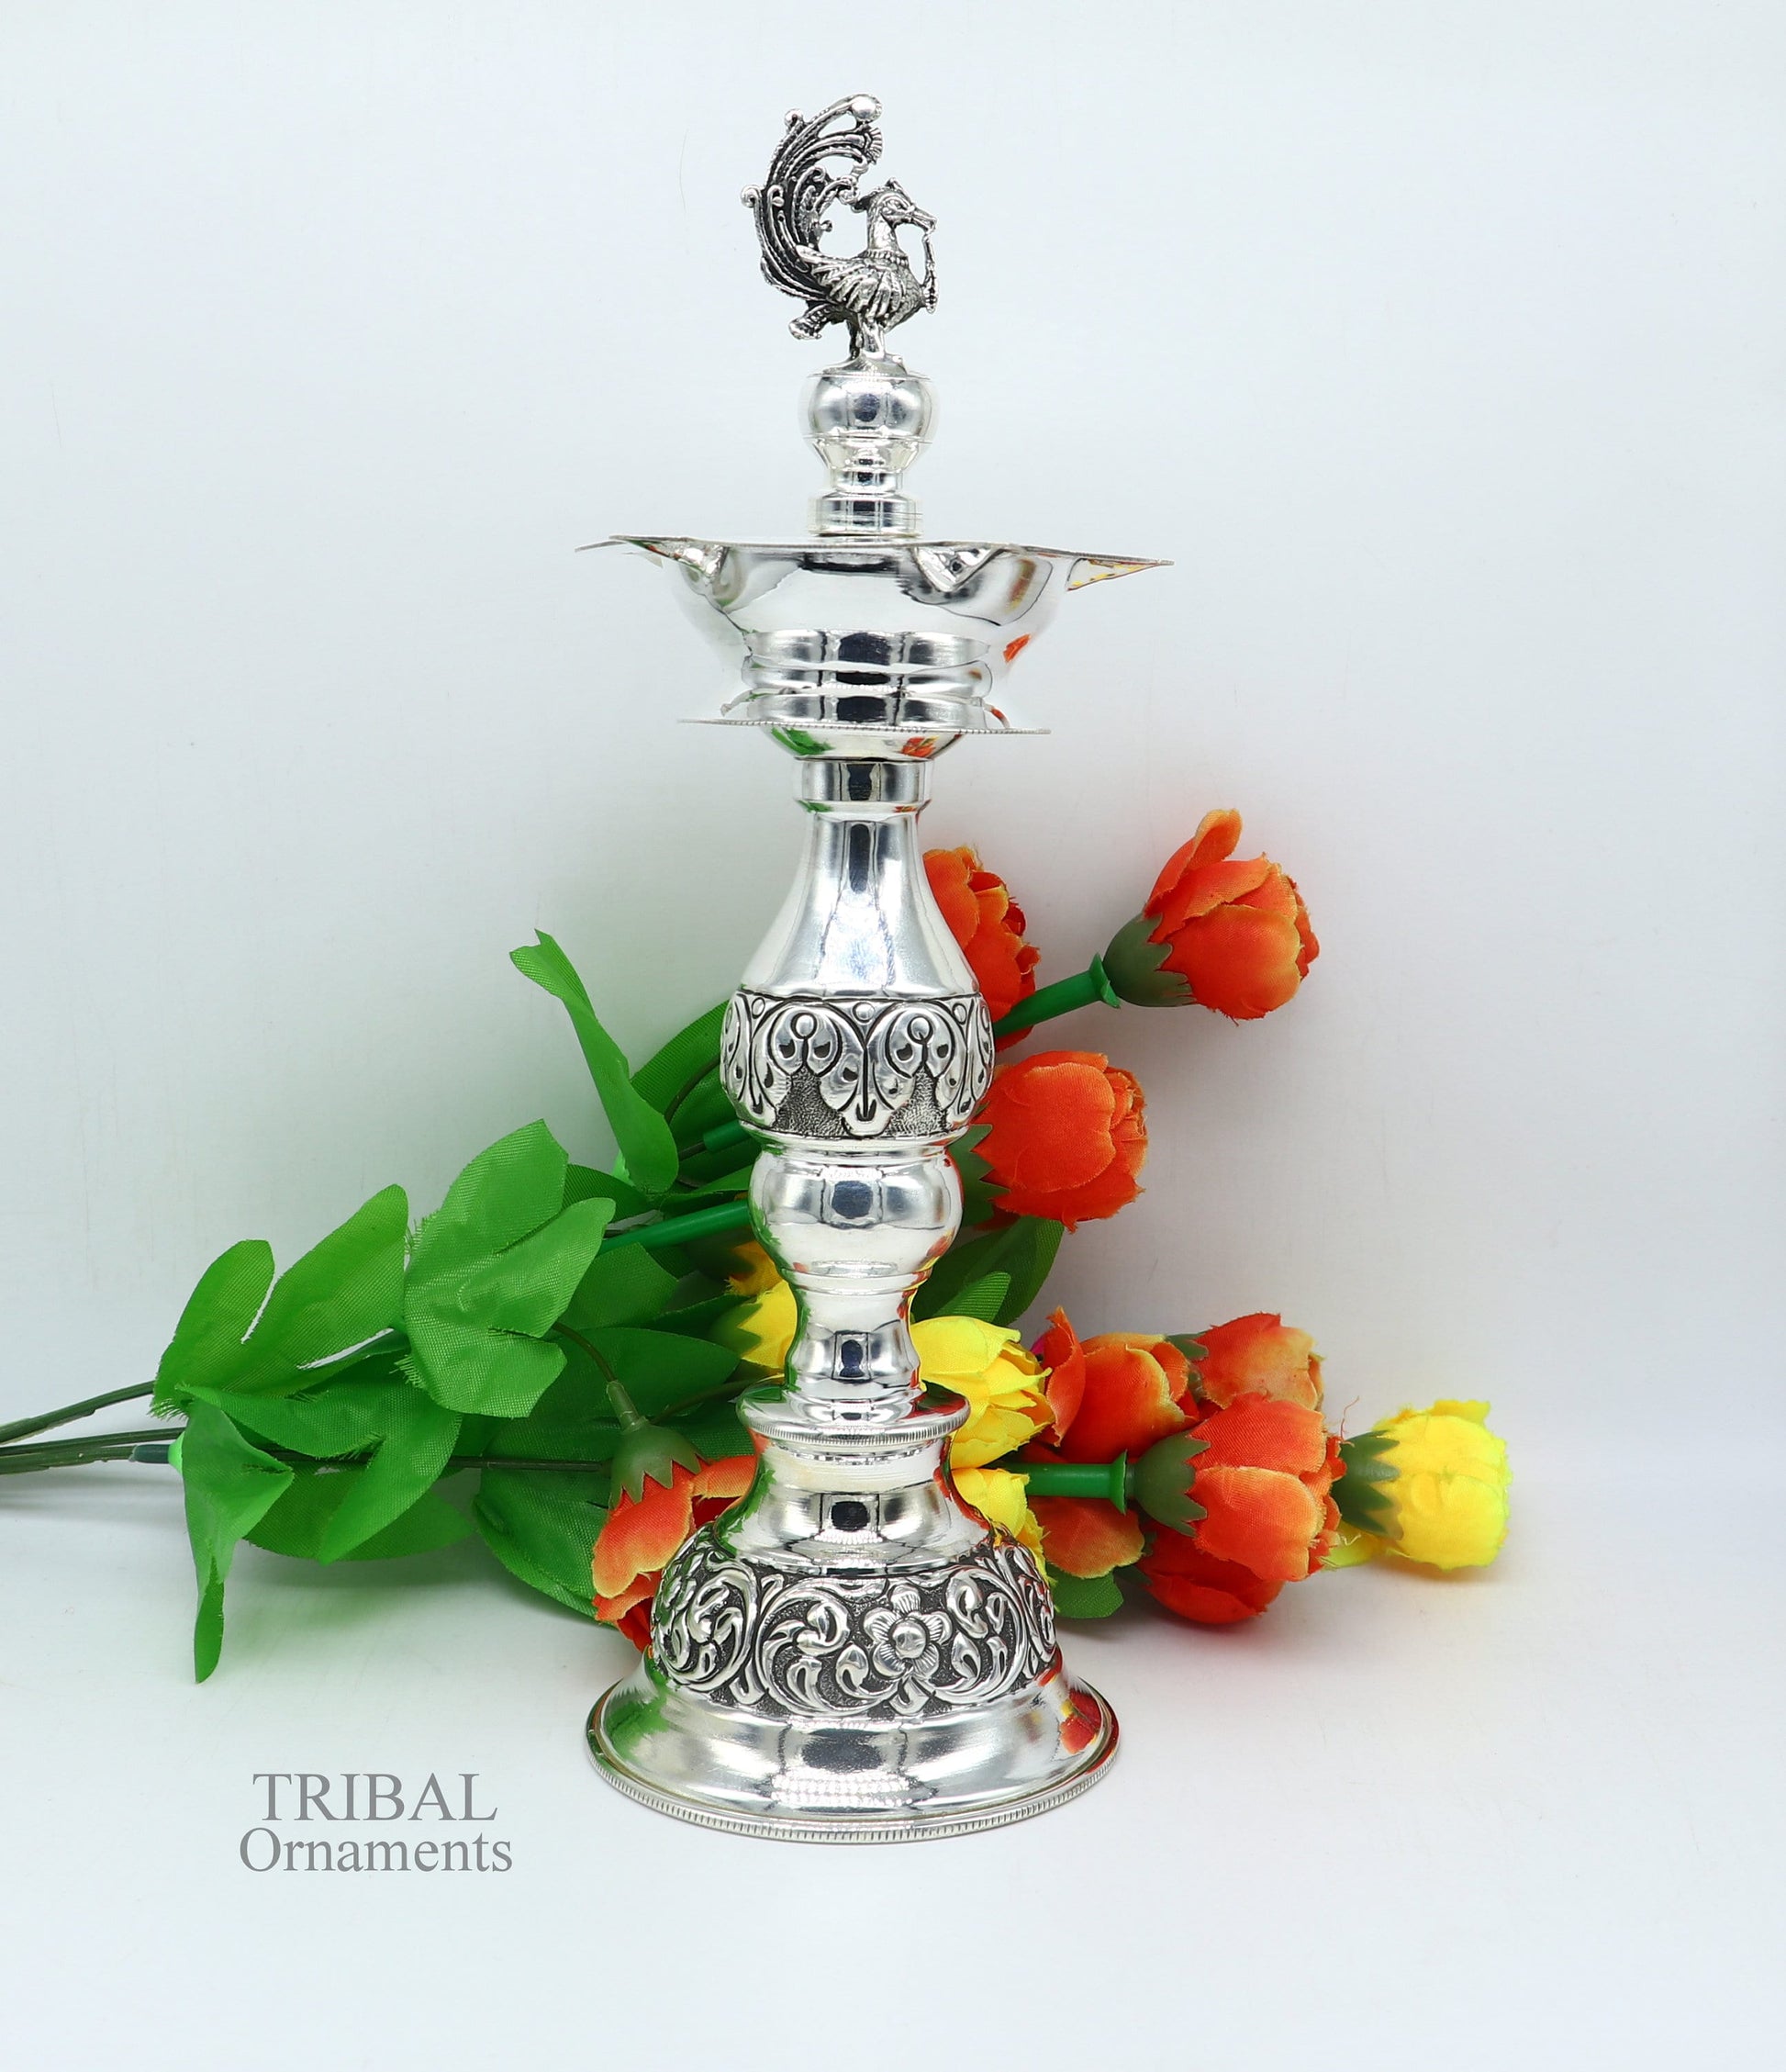 10" 925 sterling silver handcrafted vintage design Panchmukhi oil lamp, Deepak, silver puja article, silver candle stand diya figurine LMP01 - TRIBAL ORNAMENTS